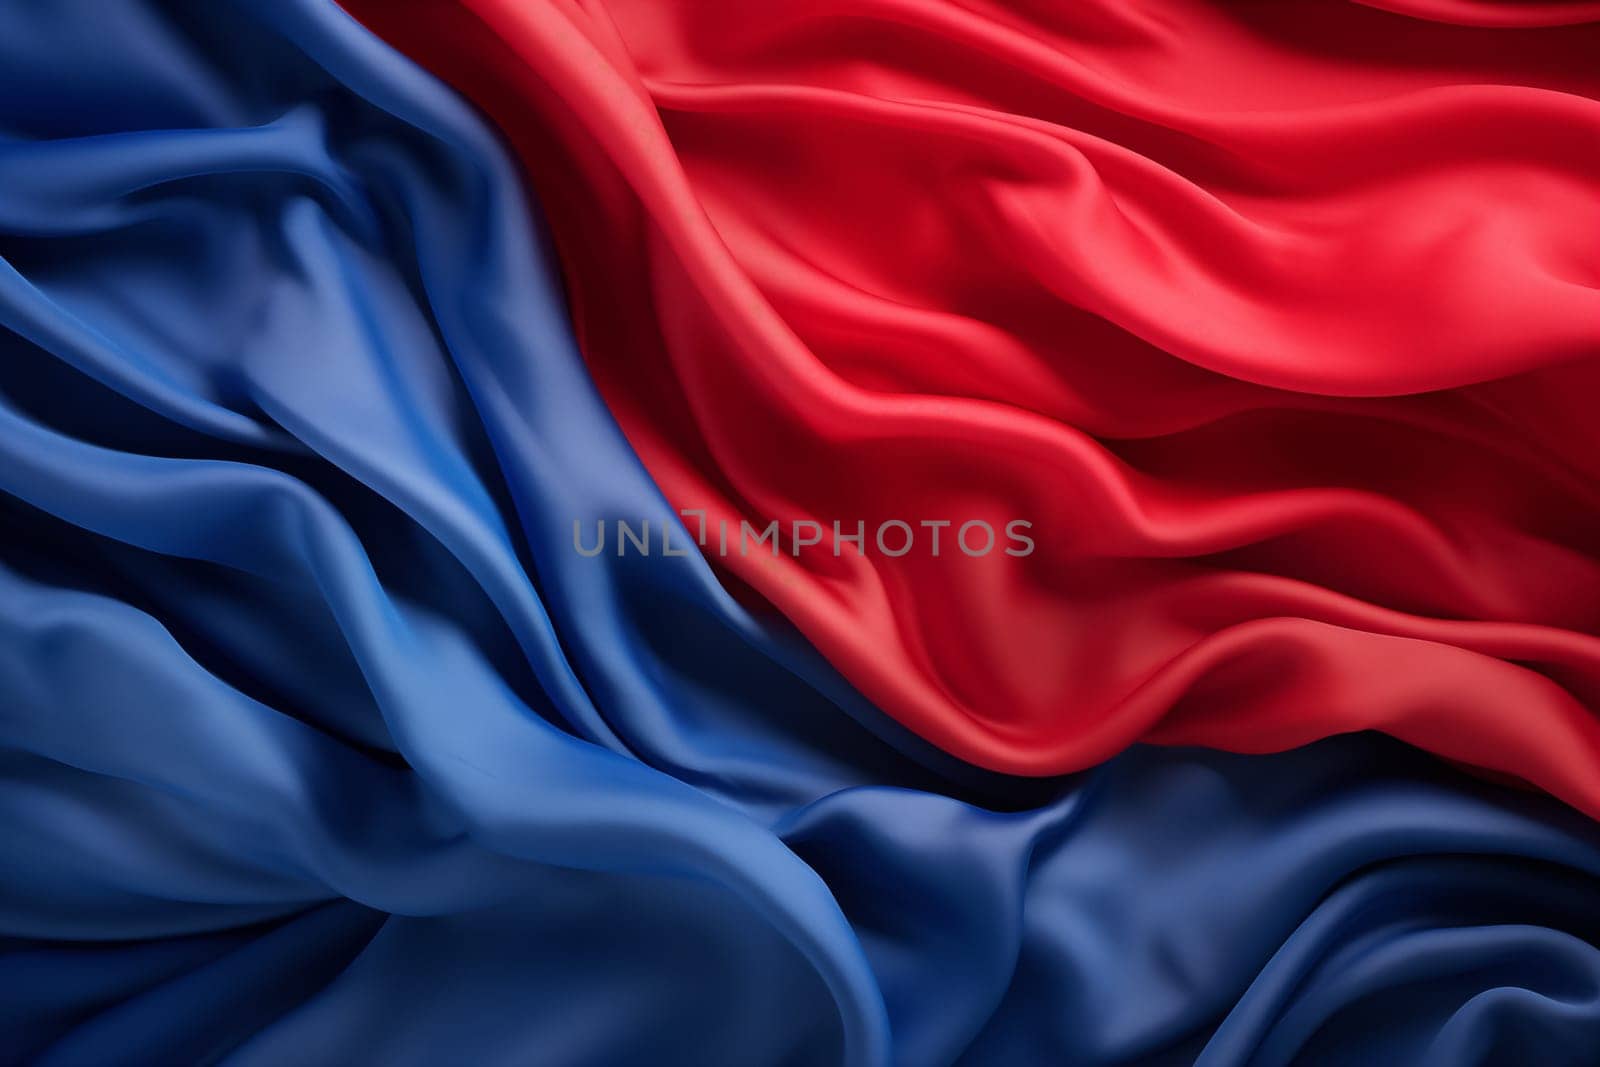 A colorful background with a red and blue fabric by Nadtochiy